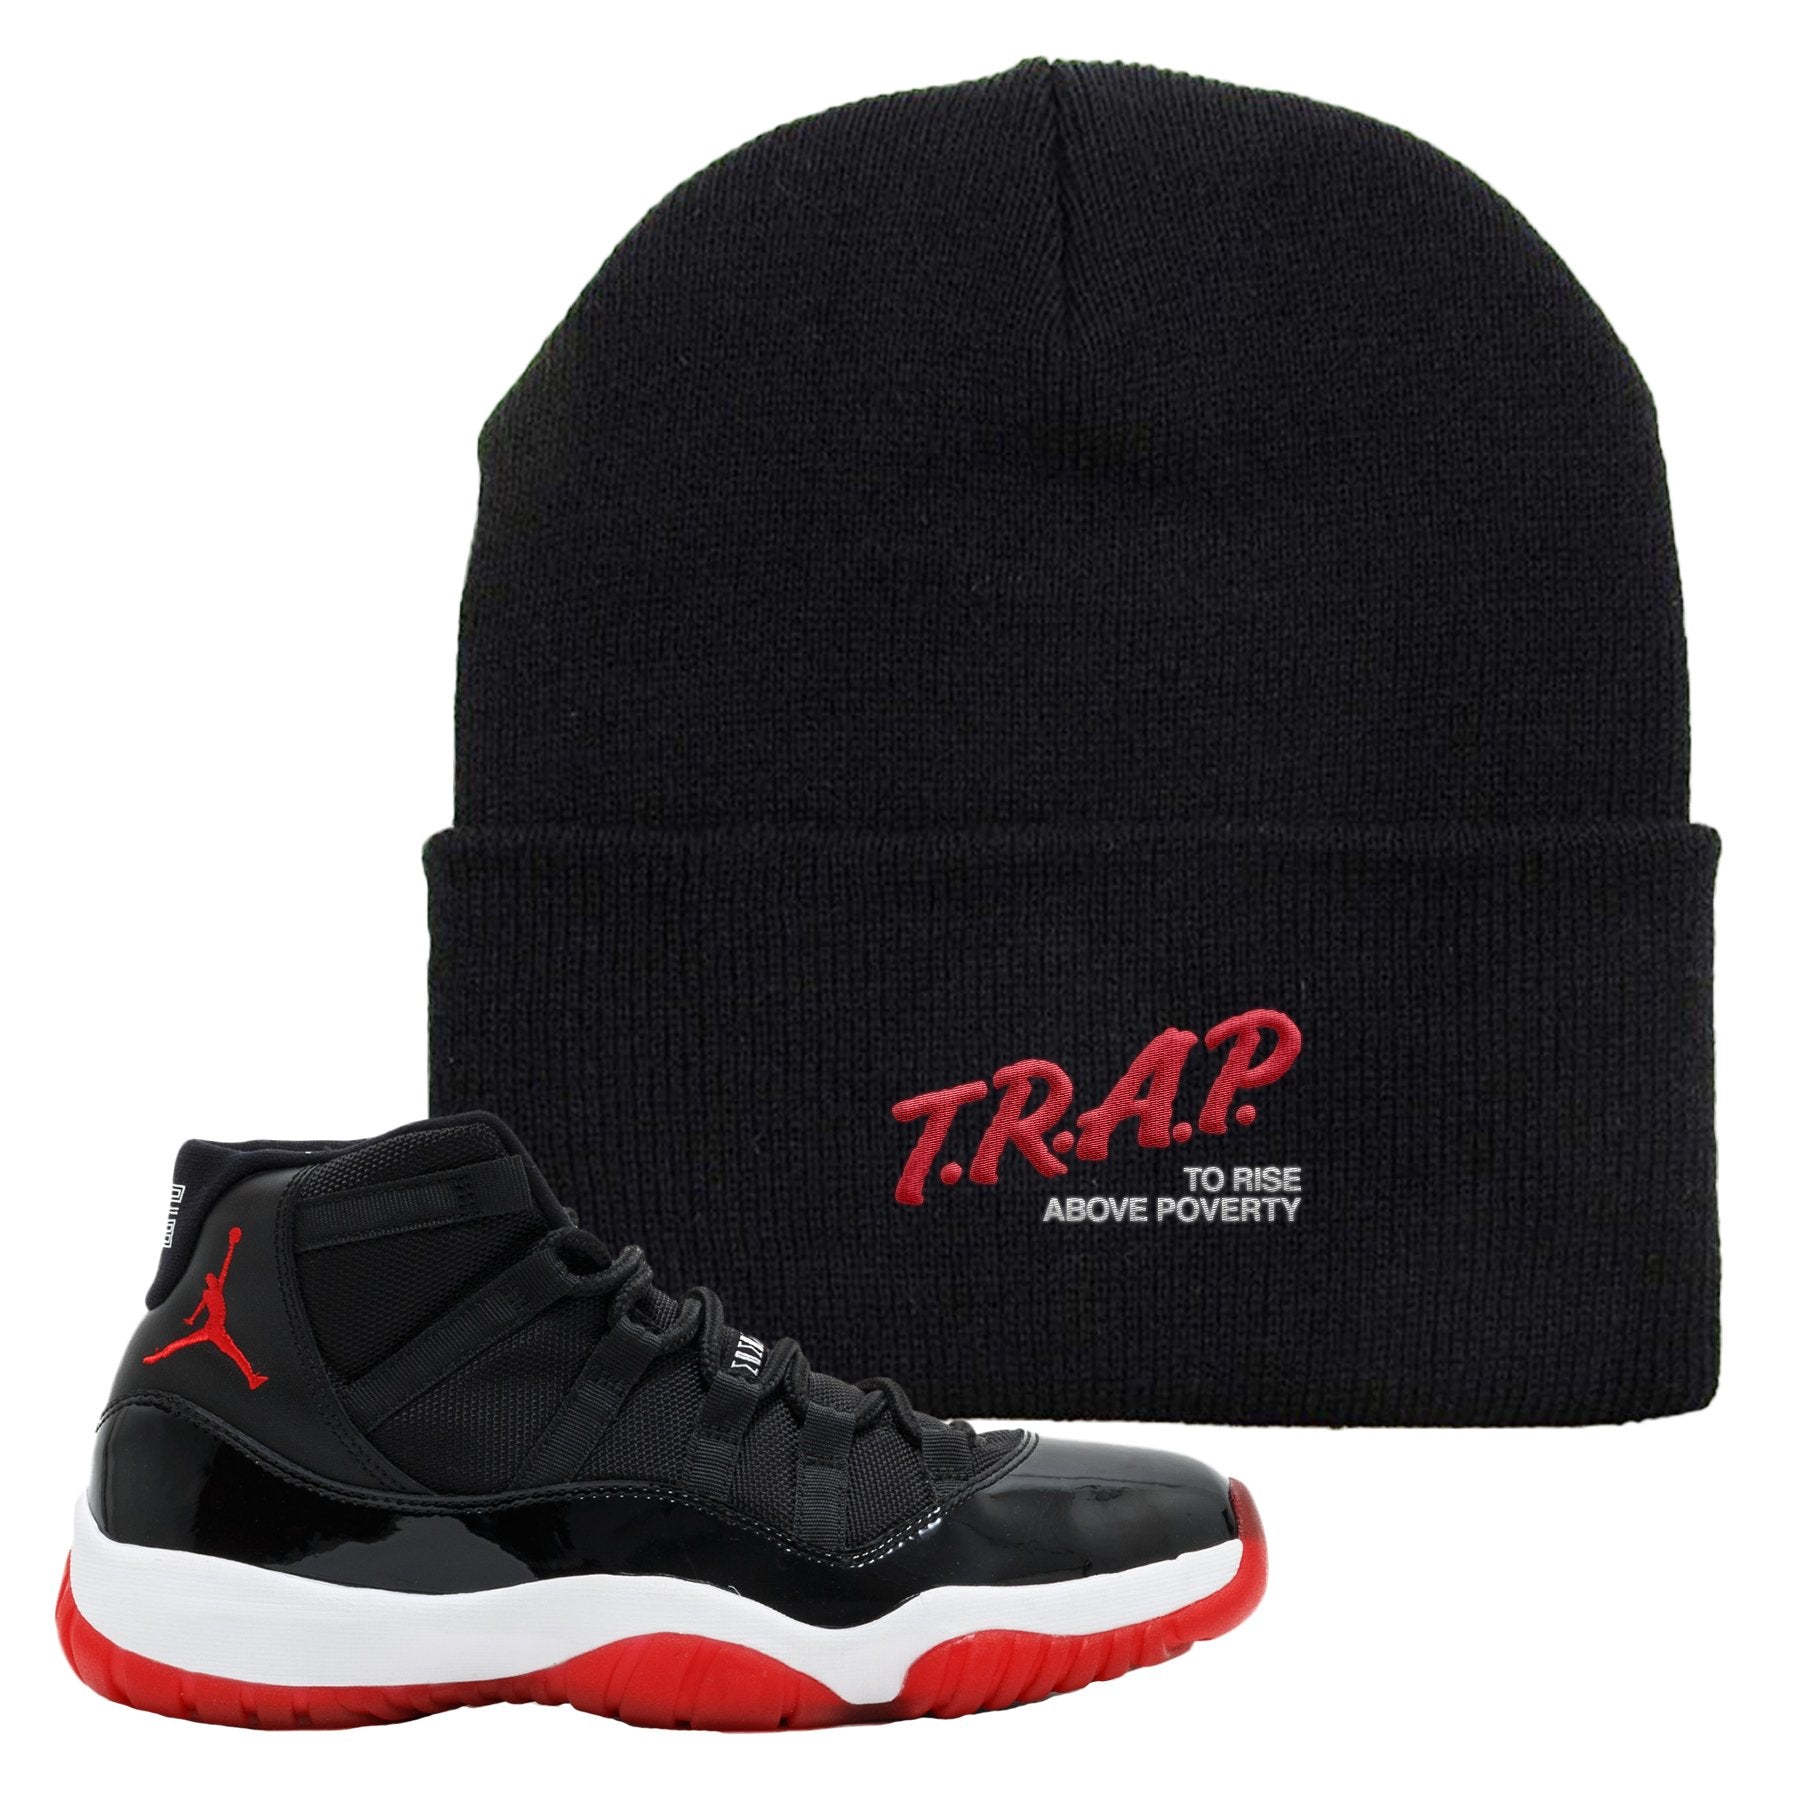 Jordan 11 Bred Trap To Rise Above Poverty Black Sneaker Hook Up Beanie